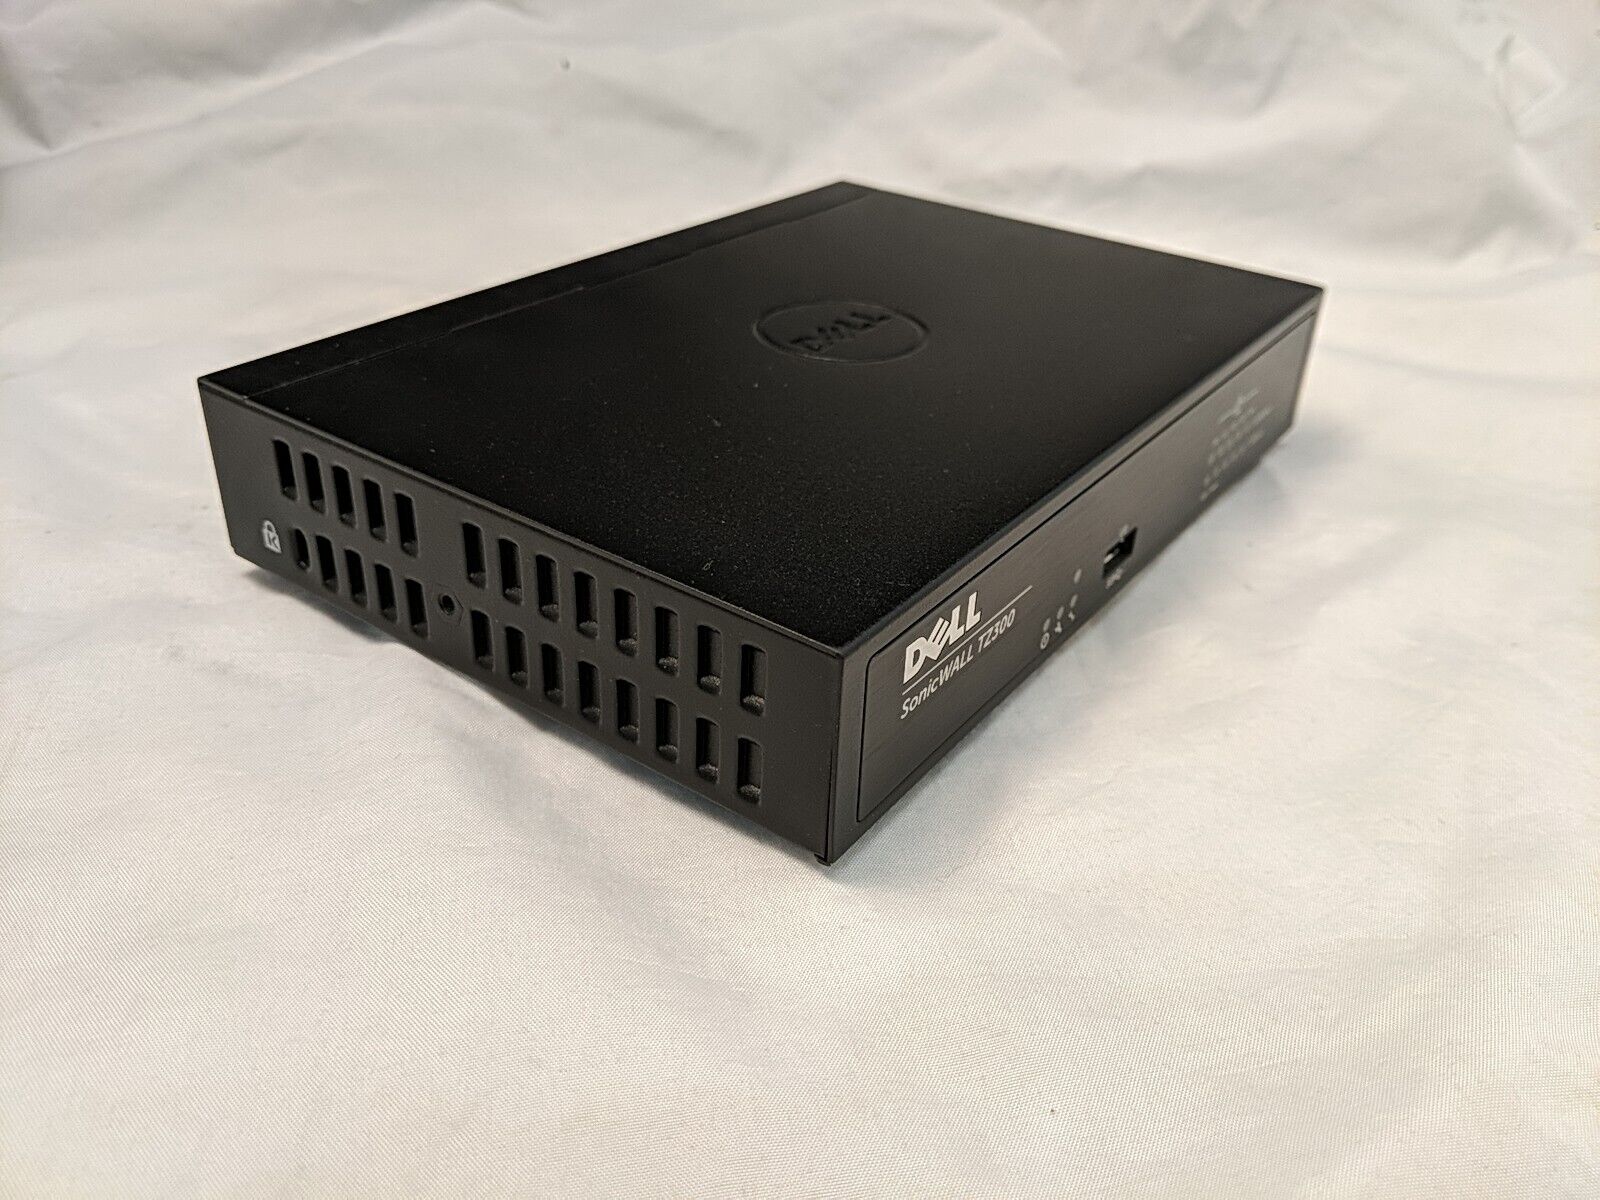 Dell SonicWall TZ300 5 Port Network Security Firewall Appliance APL28-0B4 GB922